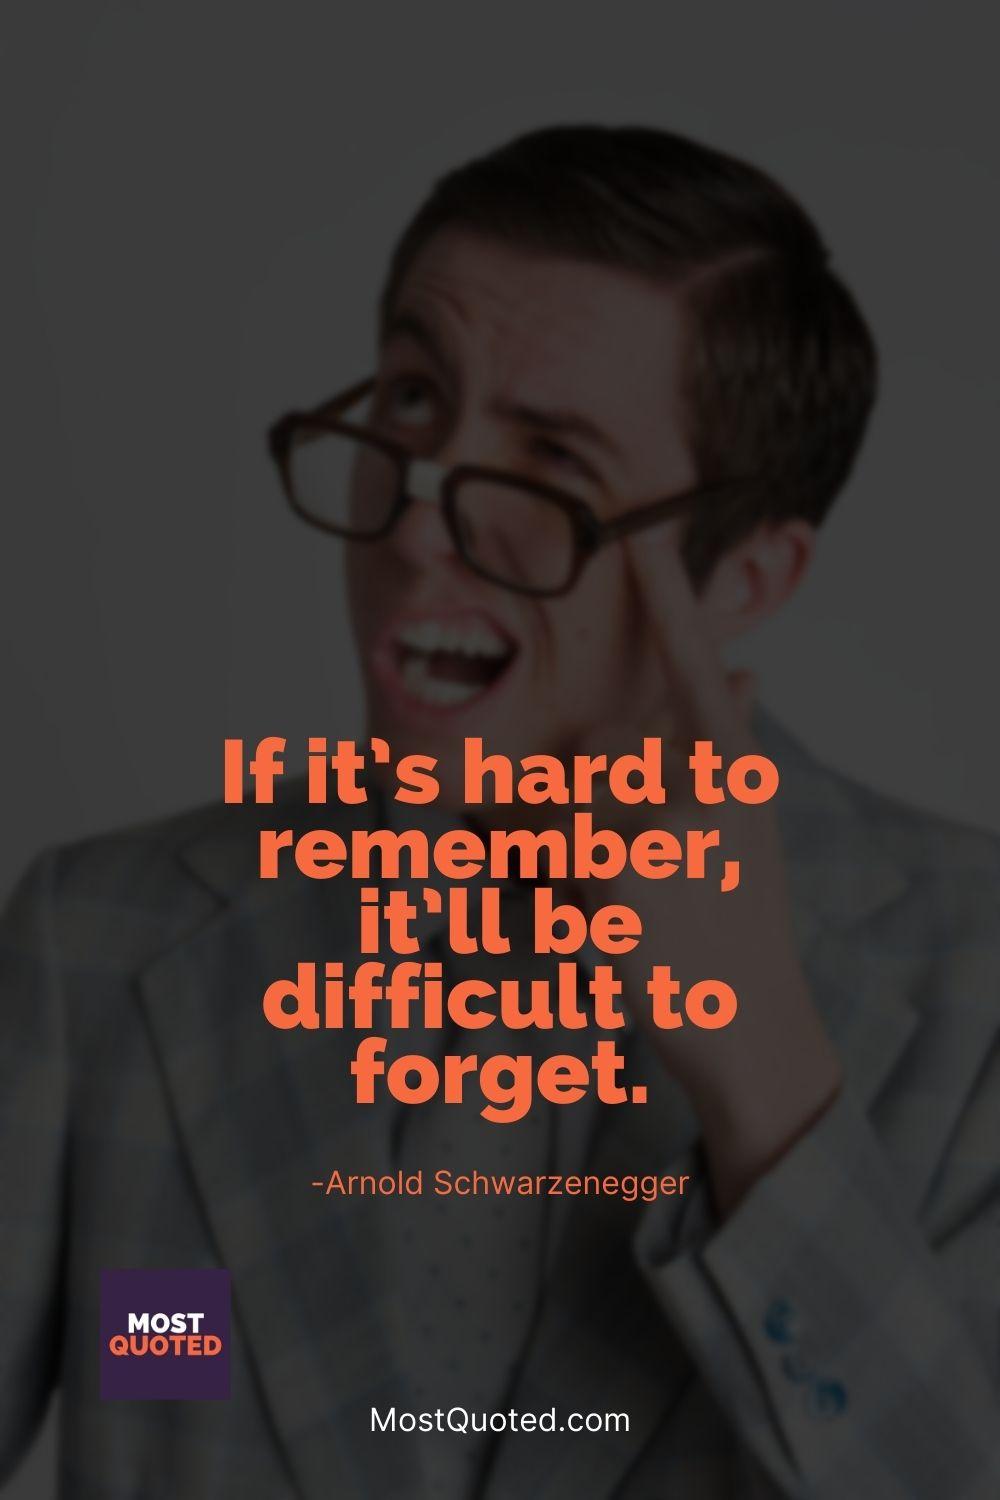 If it’s hard to remember, it’ll be difficult to forget. - Arnold Schwarzenegger